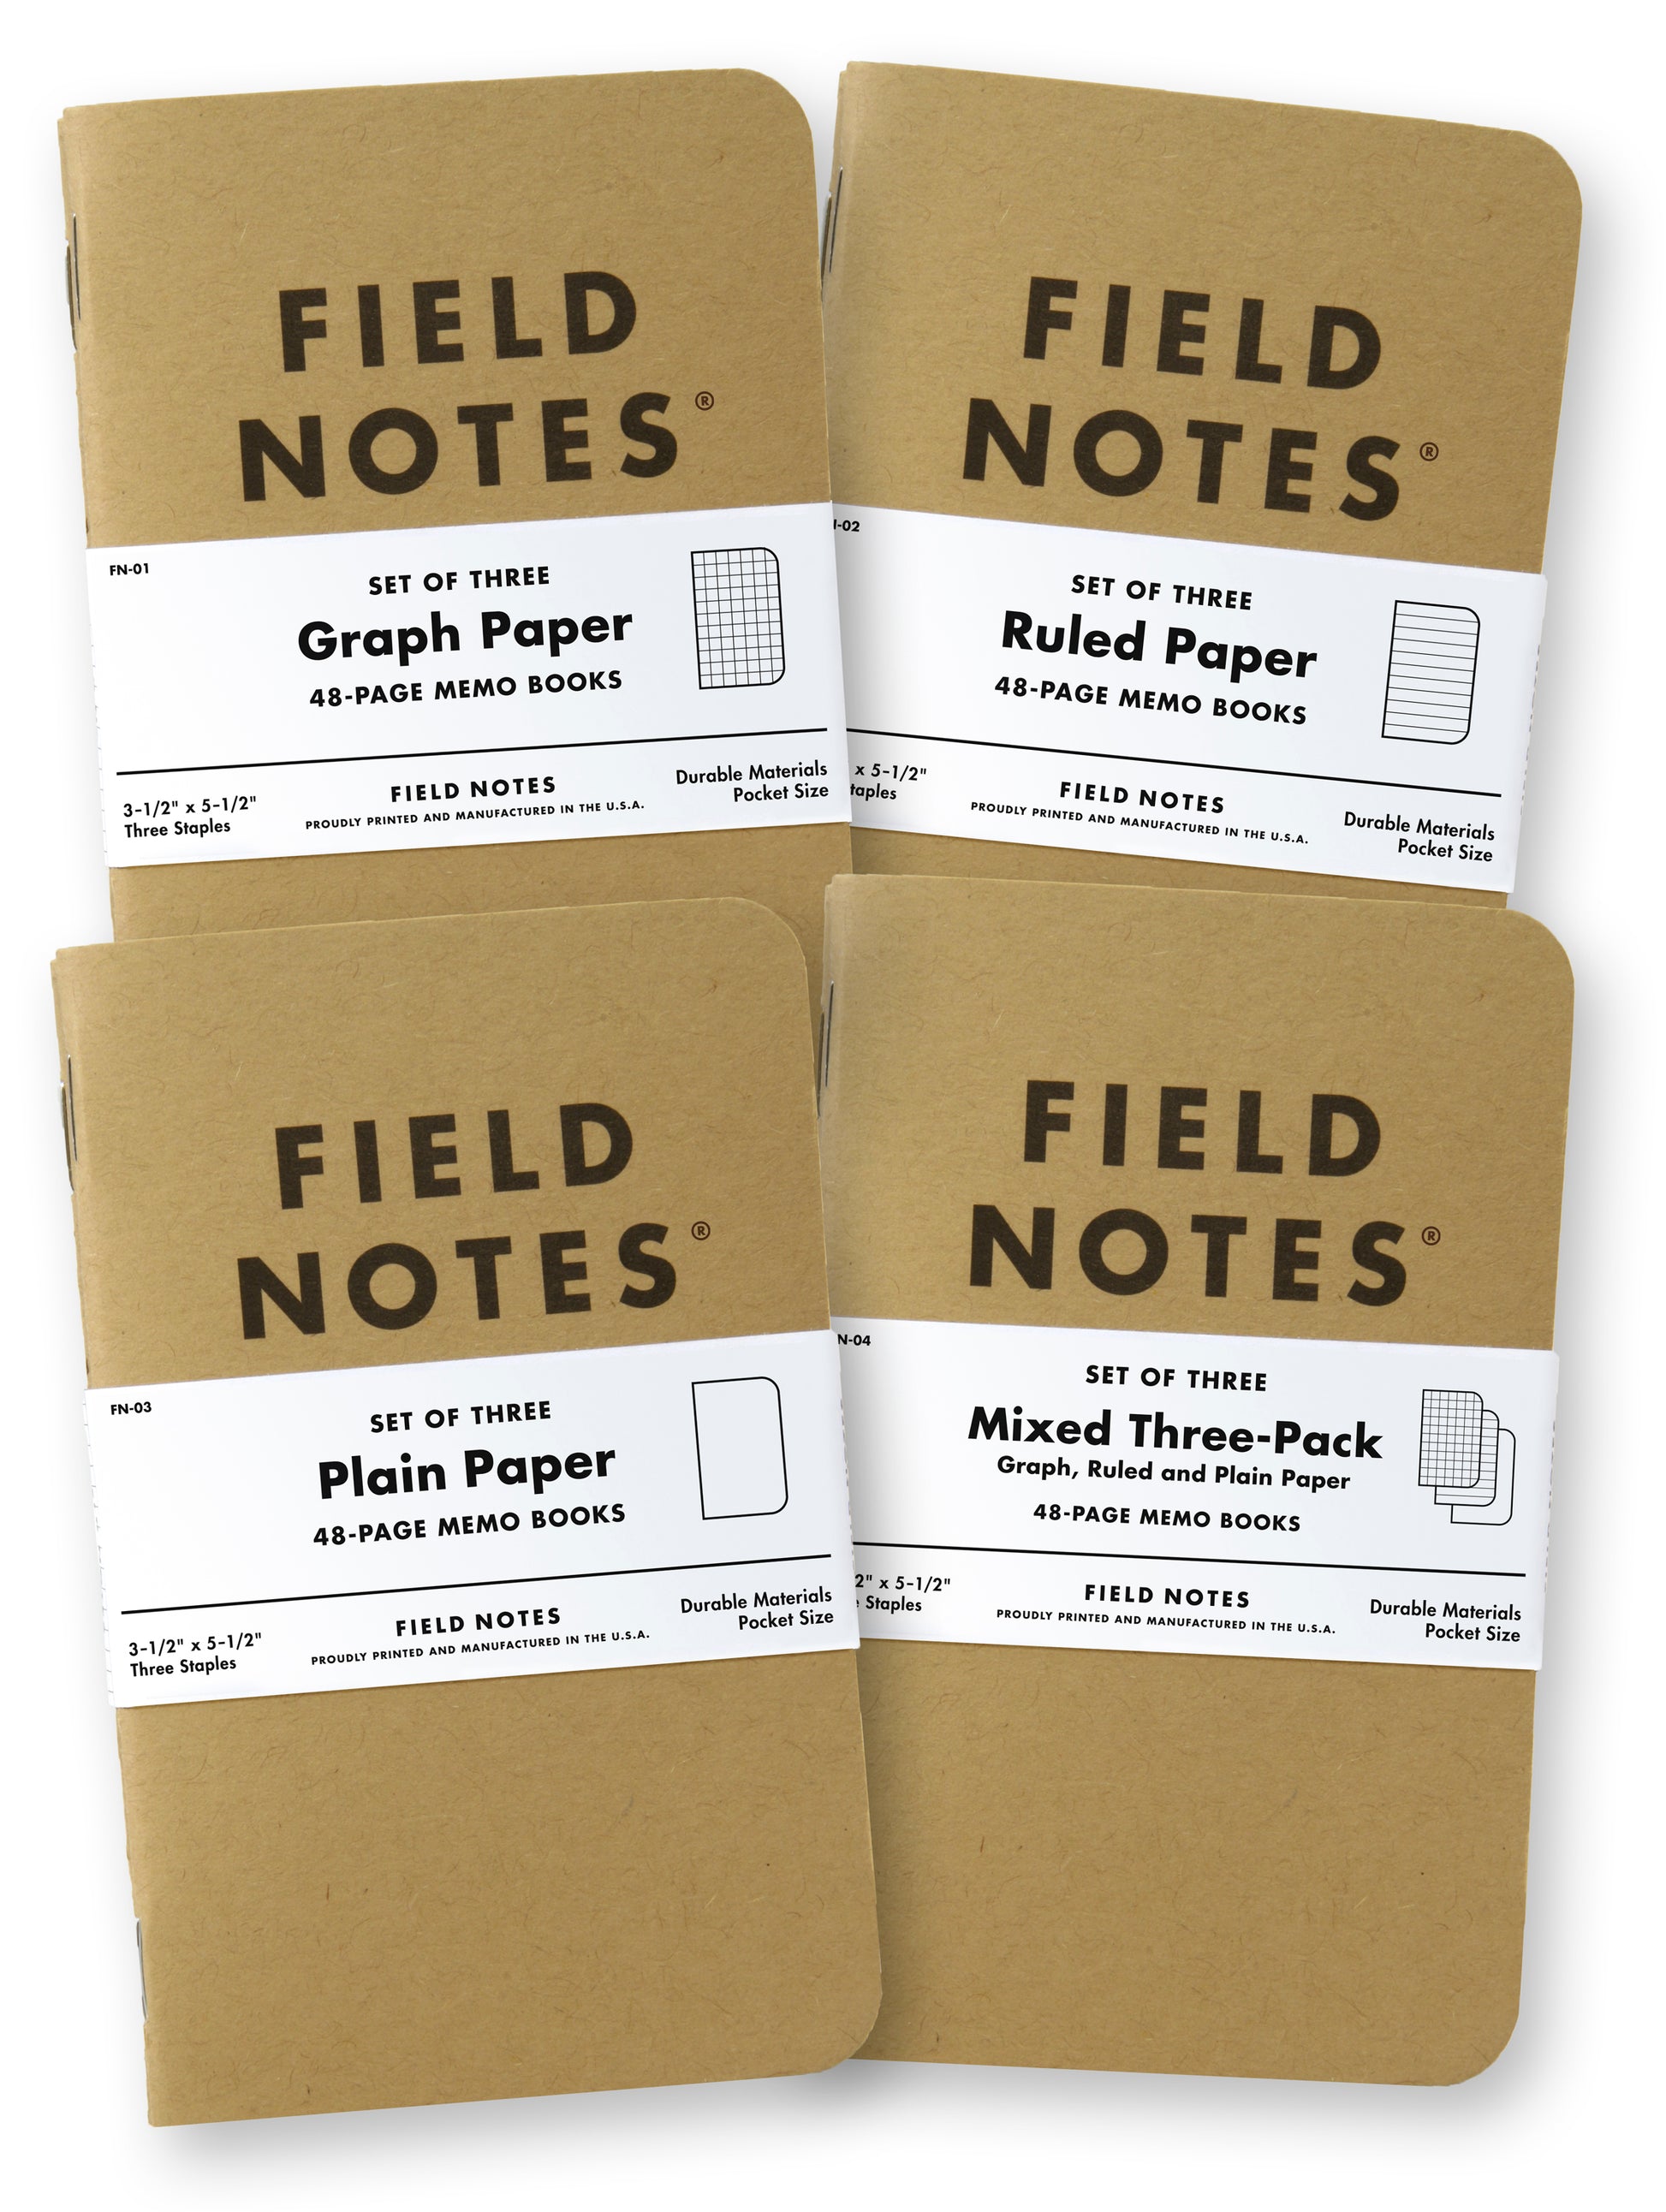 Field Notes: Original Kraft 3-Pack - Mixed Paper (1 Graph, 1 Ruled, 1 Plain  book) - 48 Pages - 3.5 x 5.5 